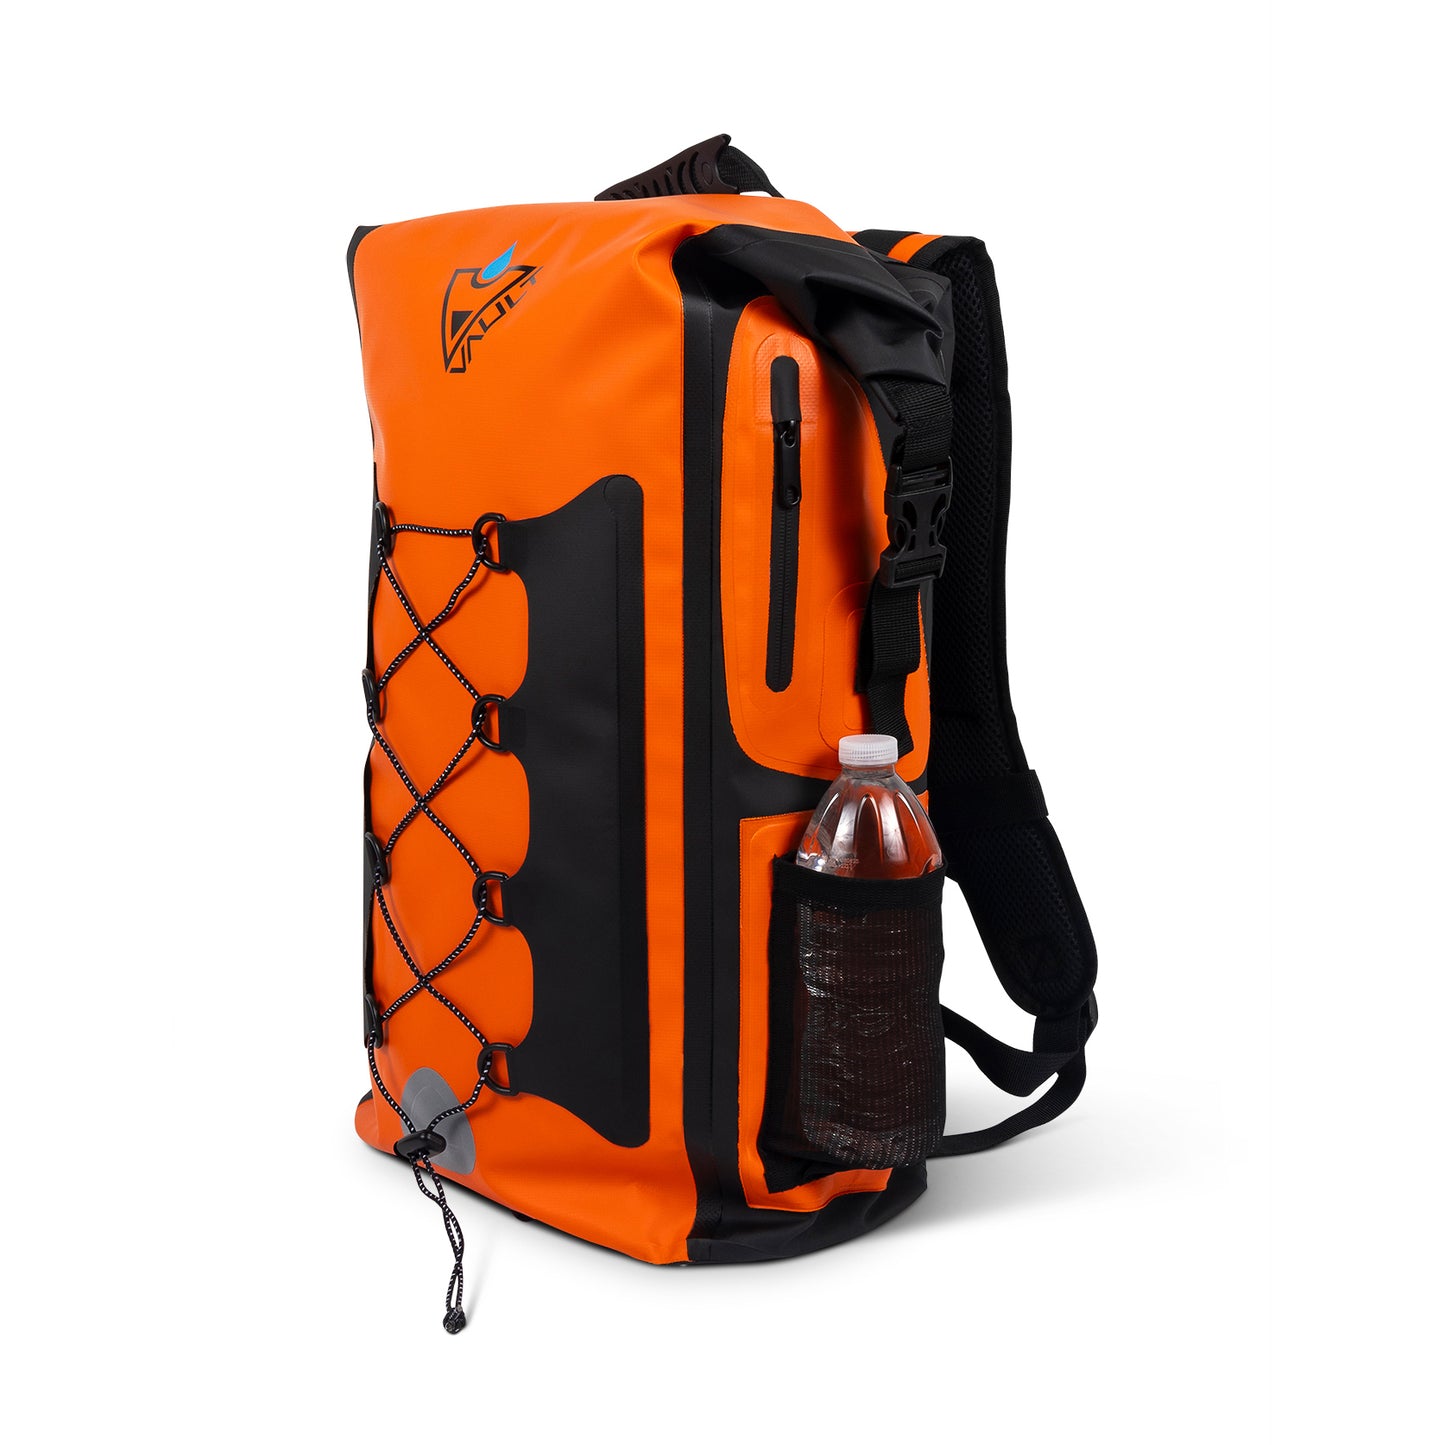 The Best Waterproof Backpack for Running, Hiking, Walking, and Commuting